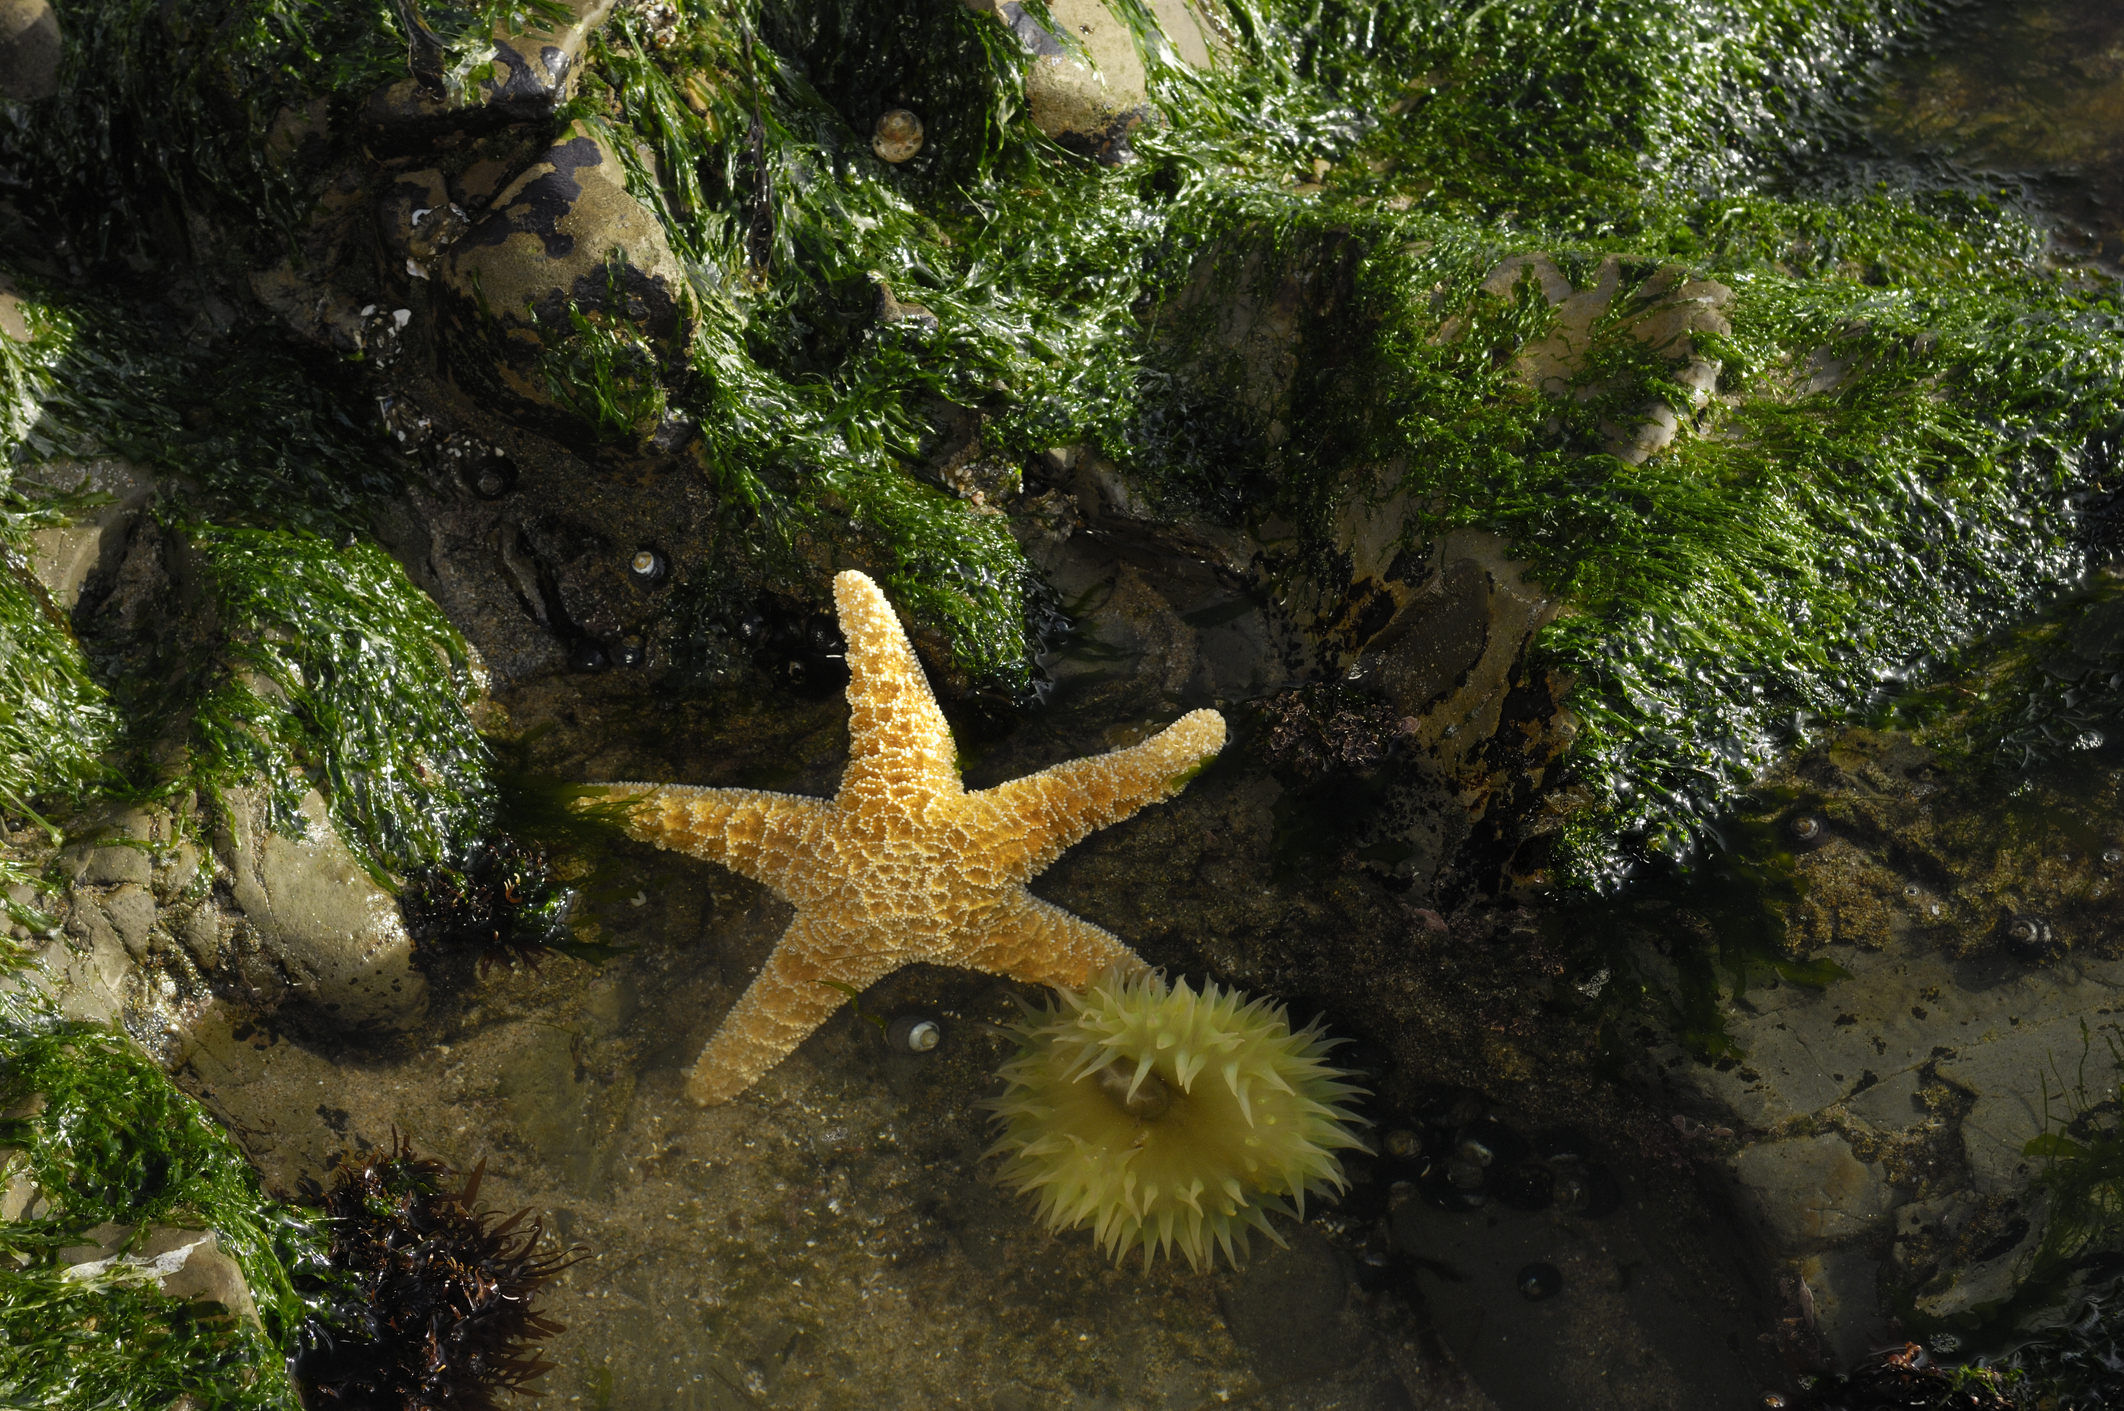 A yellow star fish is seen inside a tide pool against rocks covered in seaweed.